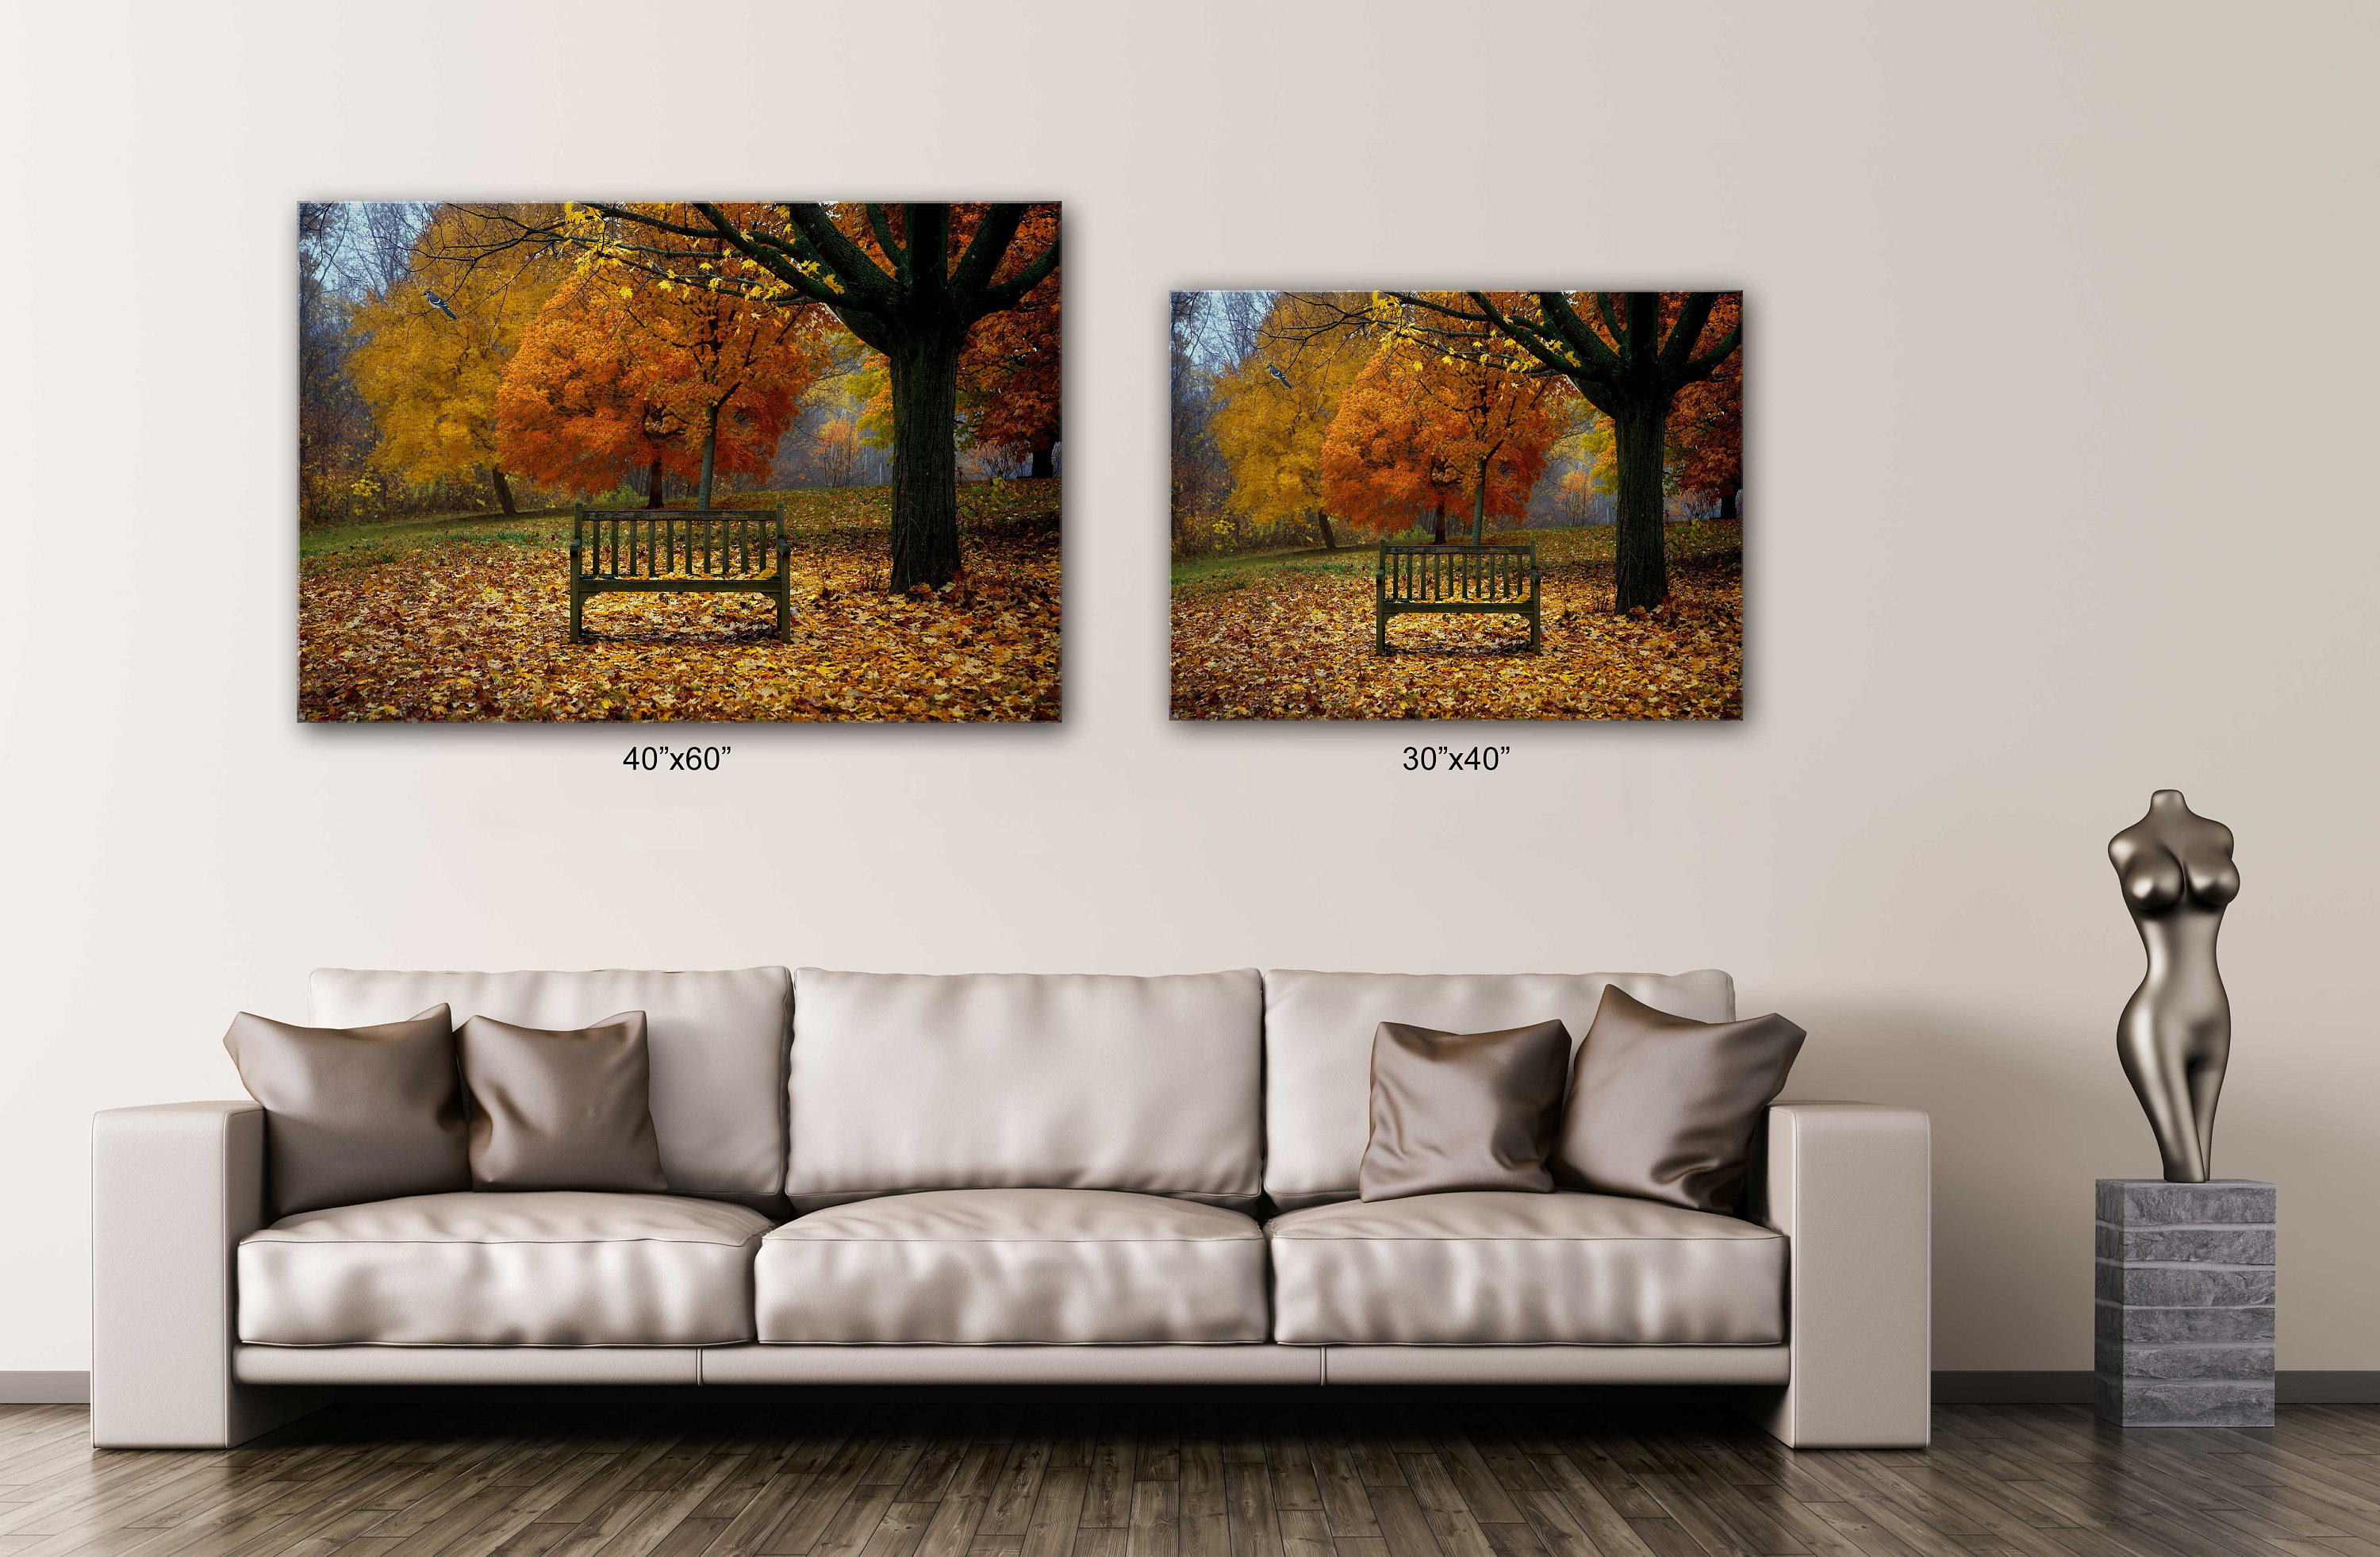 Details about   Autumn Forest Park Stairway Canvas Poster Wall Art Print Picture Framed CH092 